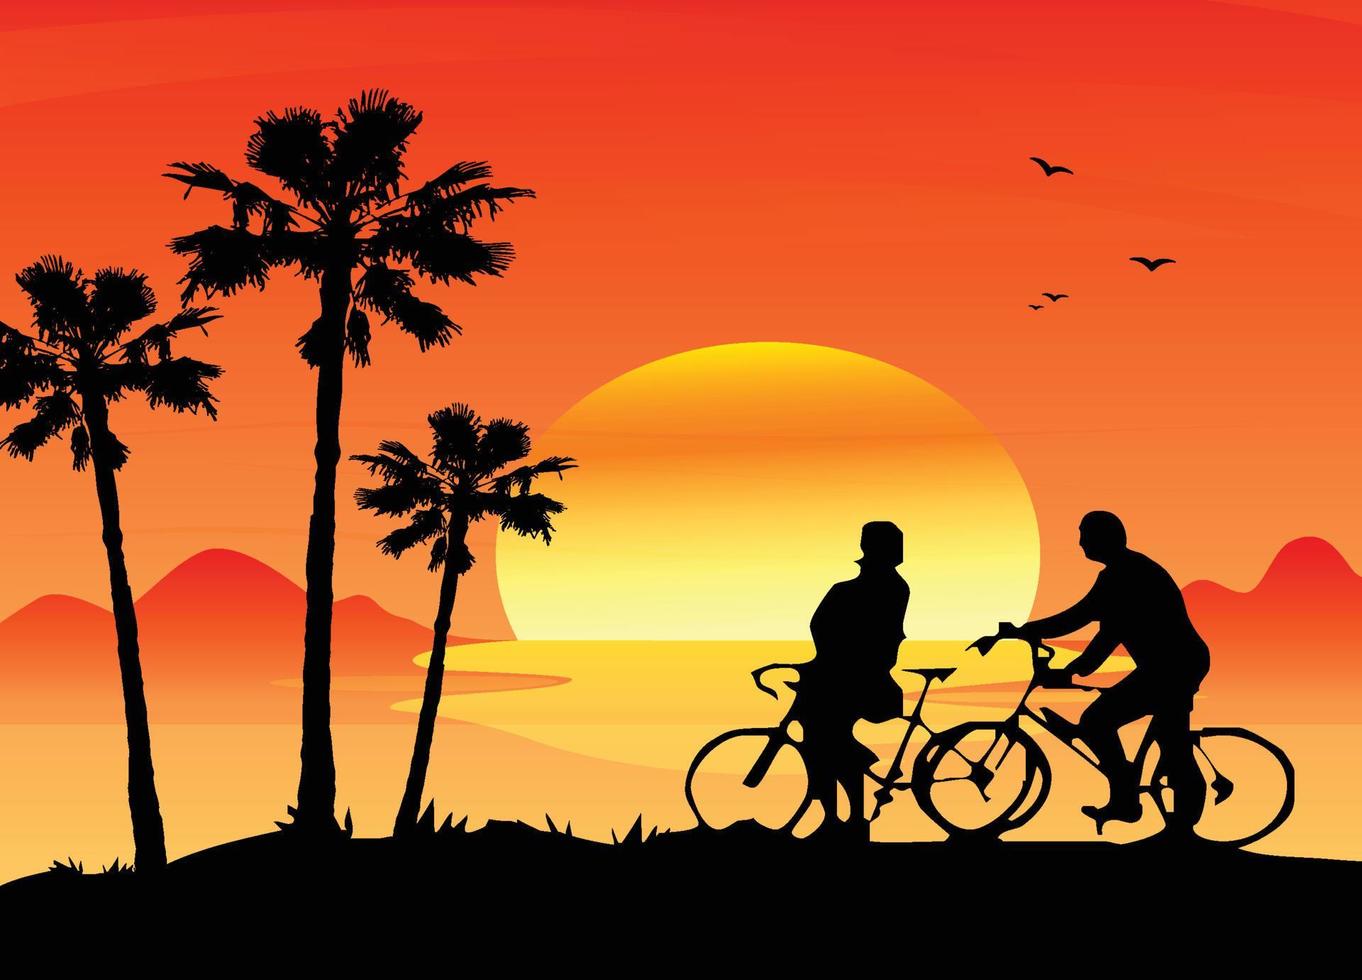 Silhouettes of a man and a woman riding bikes, palm trees and a hill vector